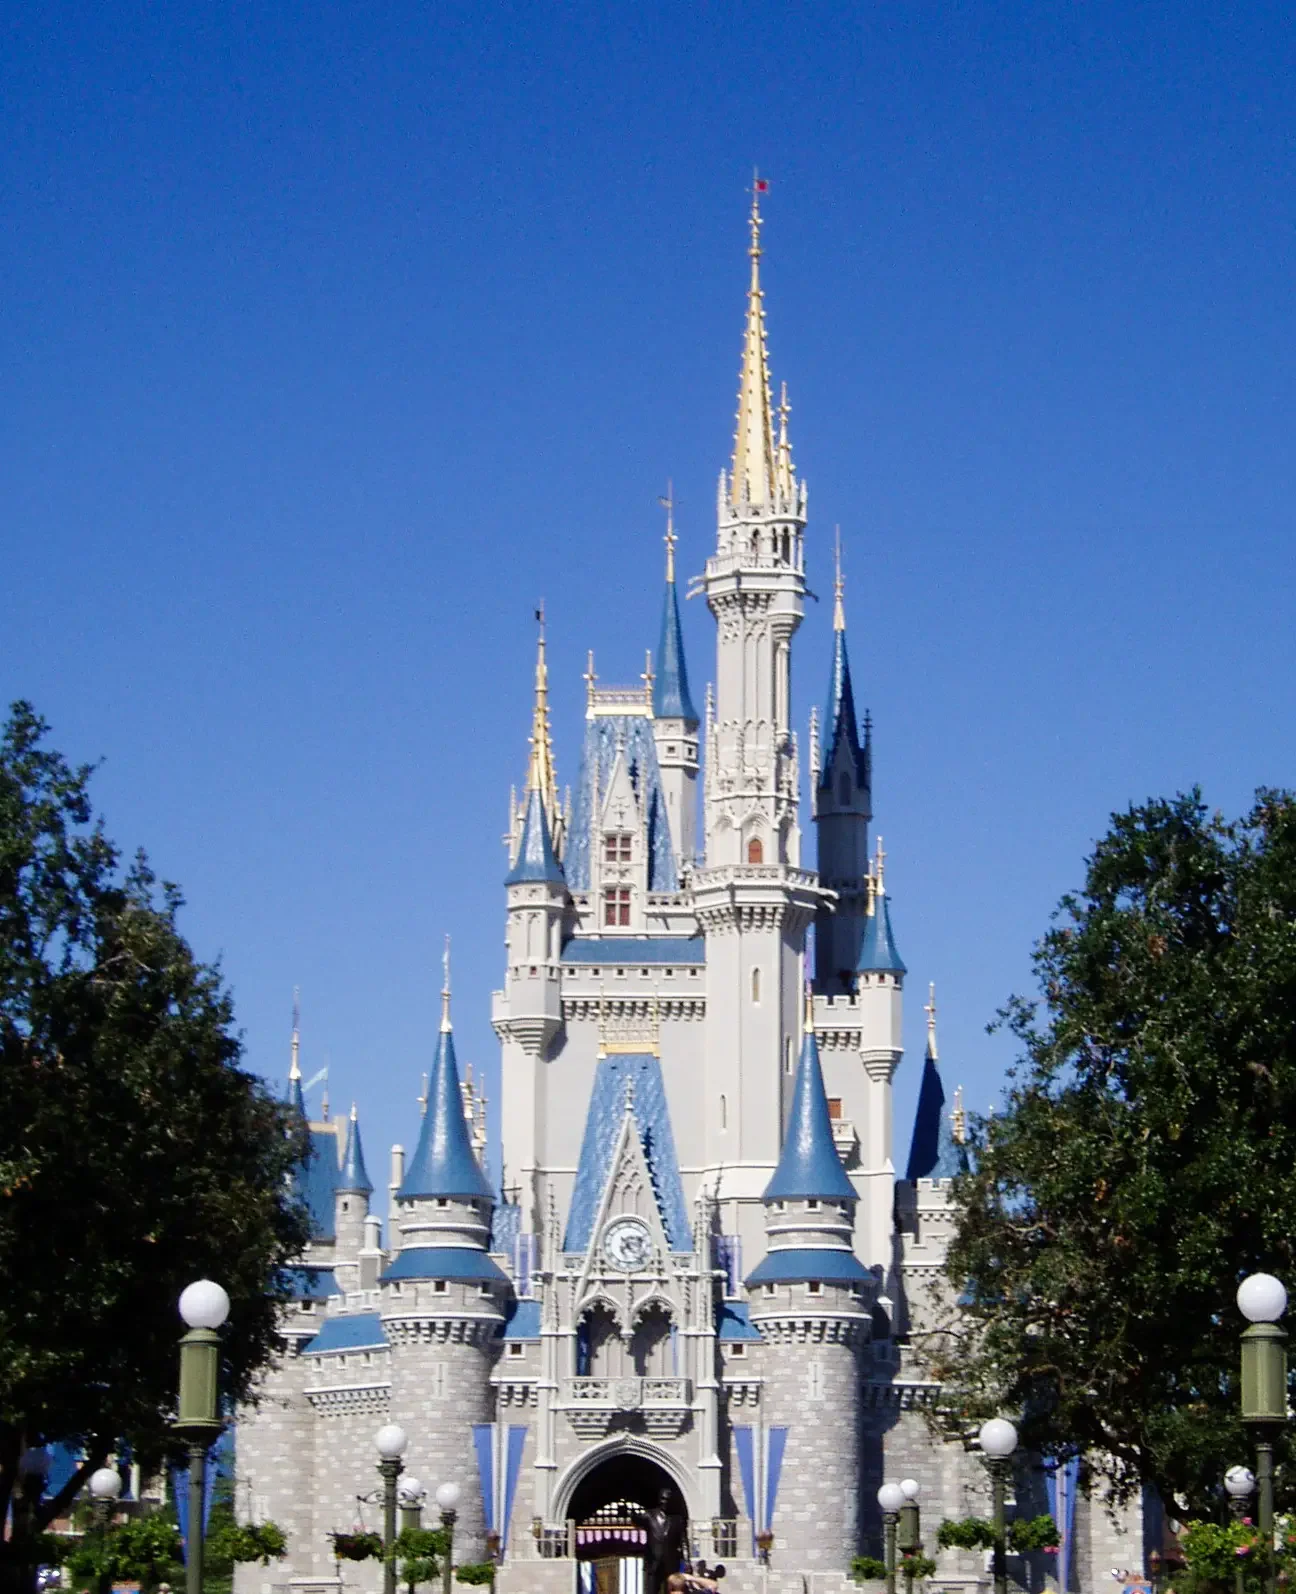 Tips to get the most out of Walt Disney World